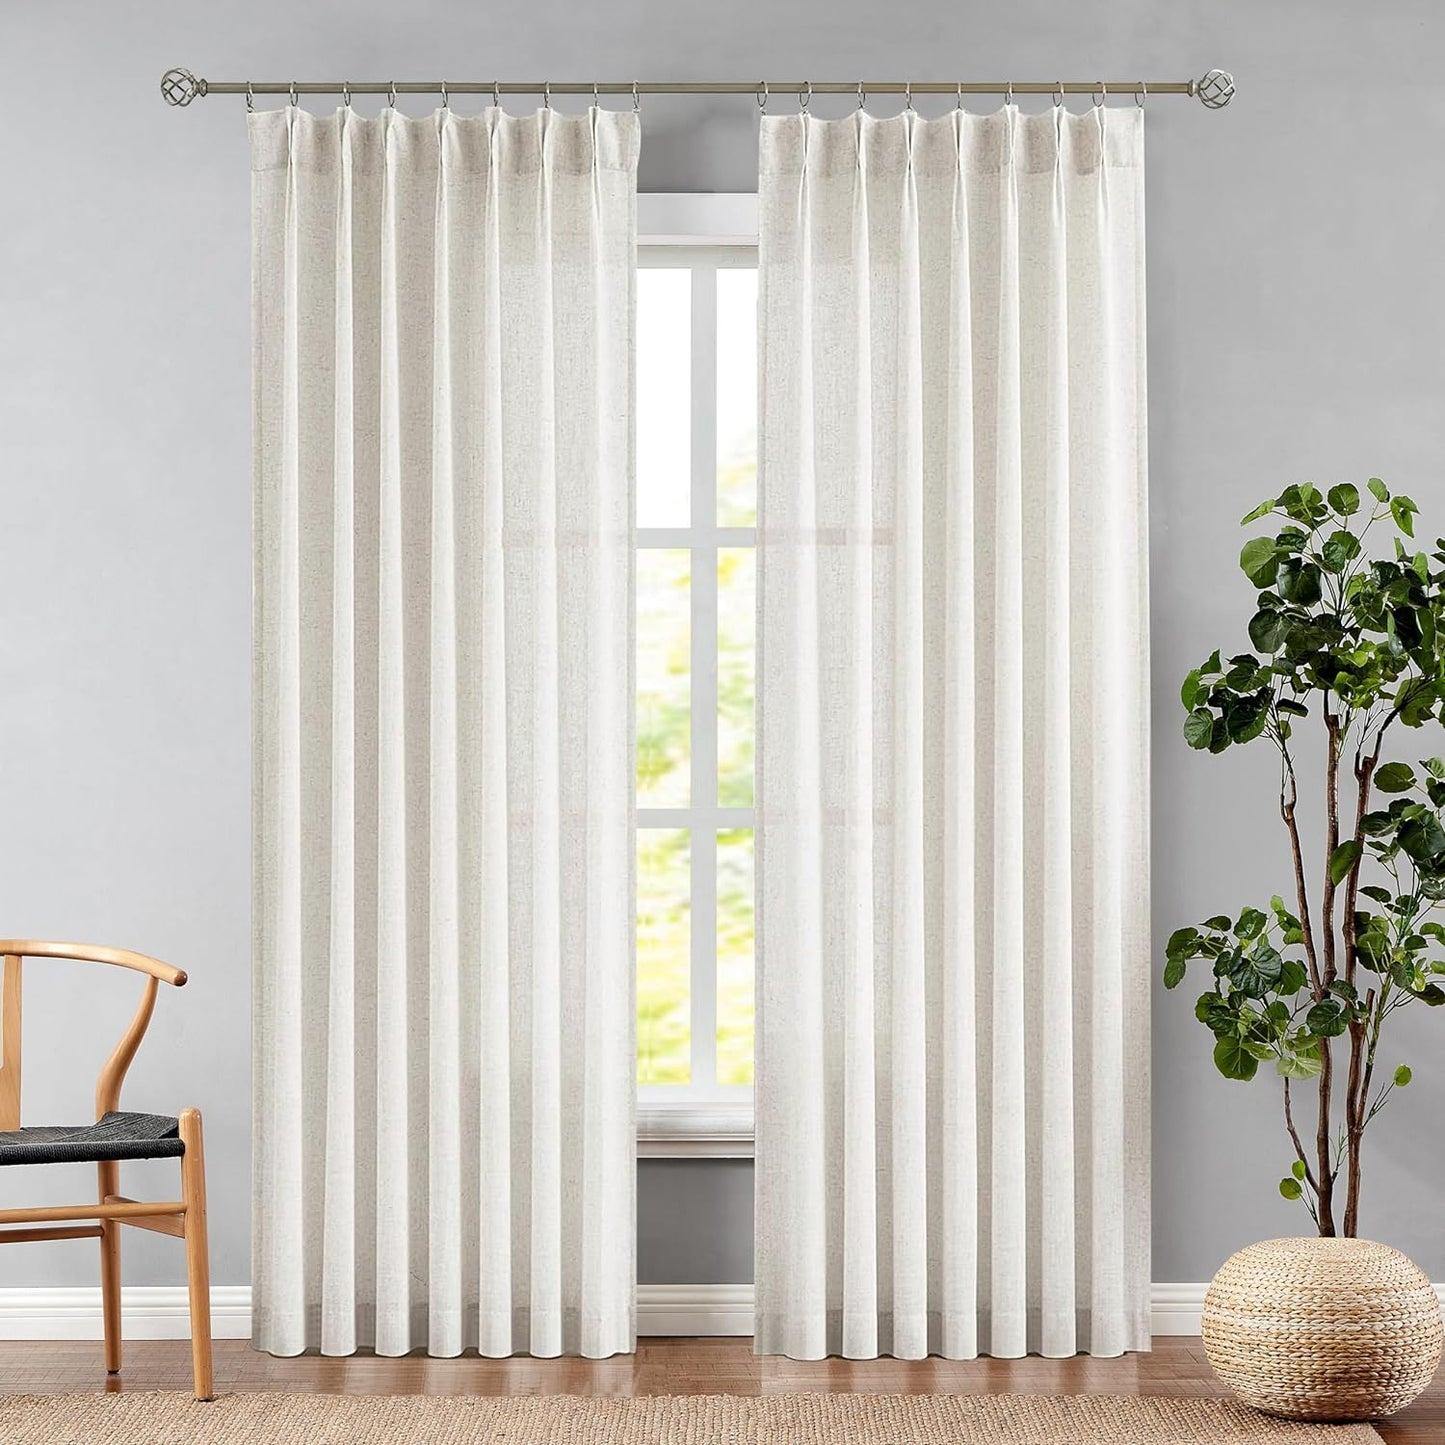 Central Park White Pinch Pleat Sheer Curtain 108 Inches Extra Long Textured Farmhouse Window Treatment Drapery Sets for Living Room Bedroom, 40"X108"X2  Central Park Linen/Pinch 40"X120"X2 